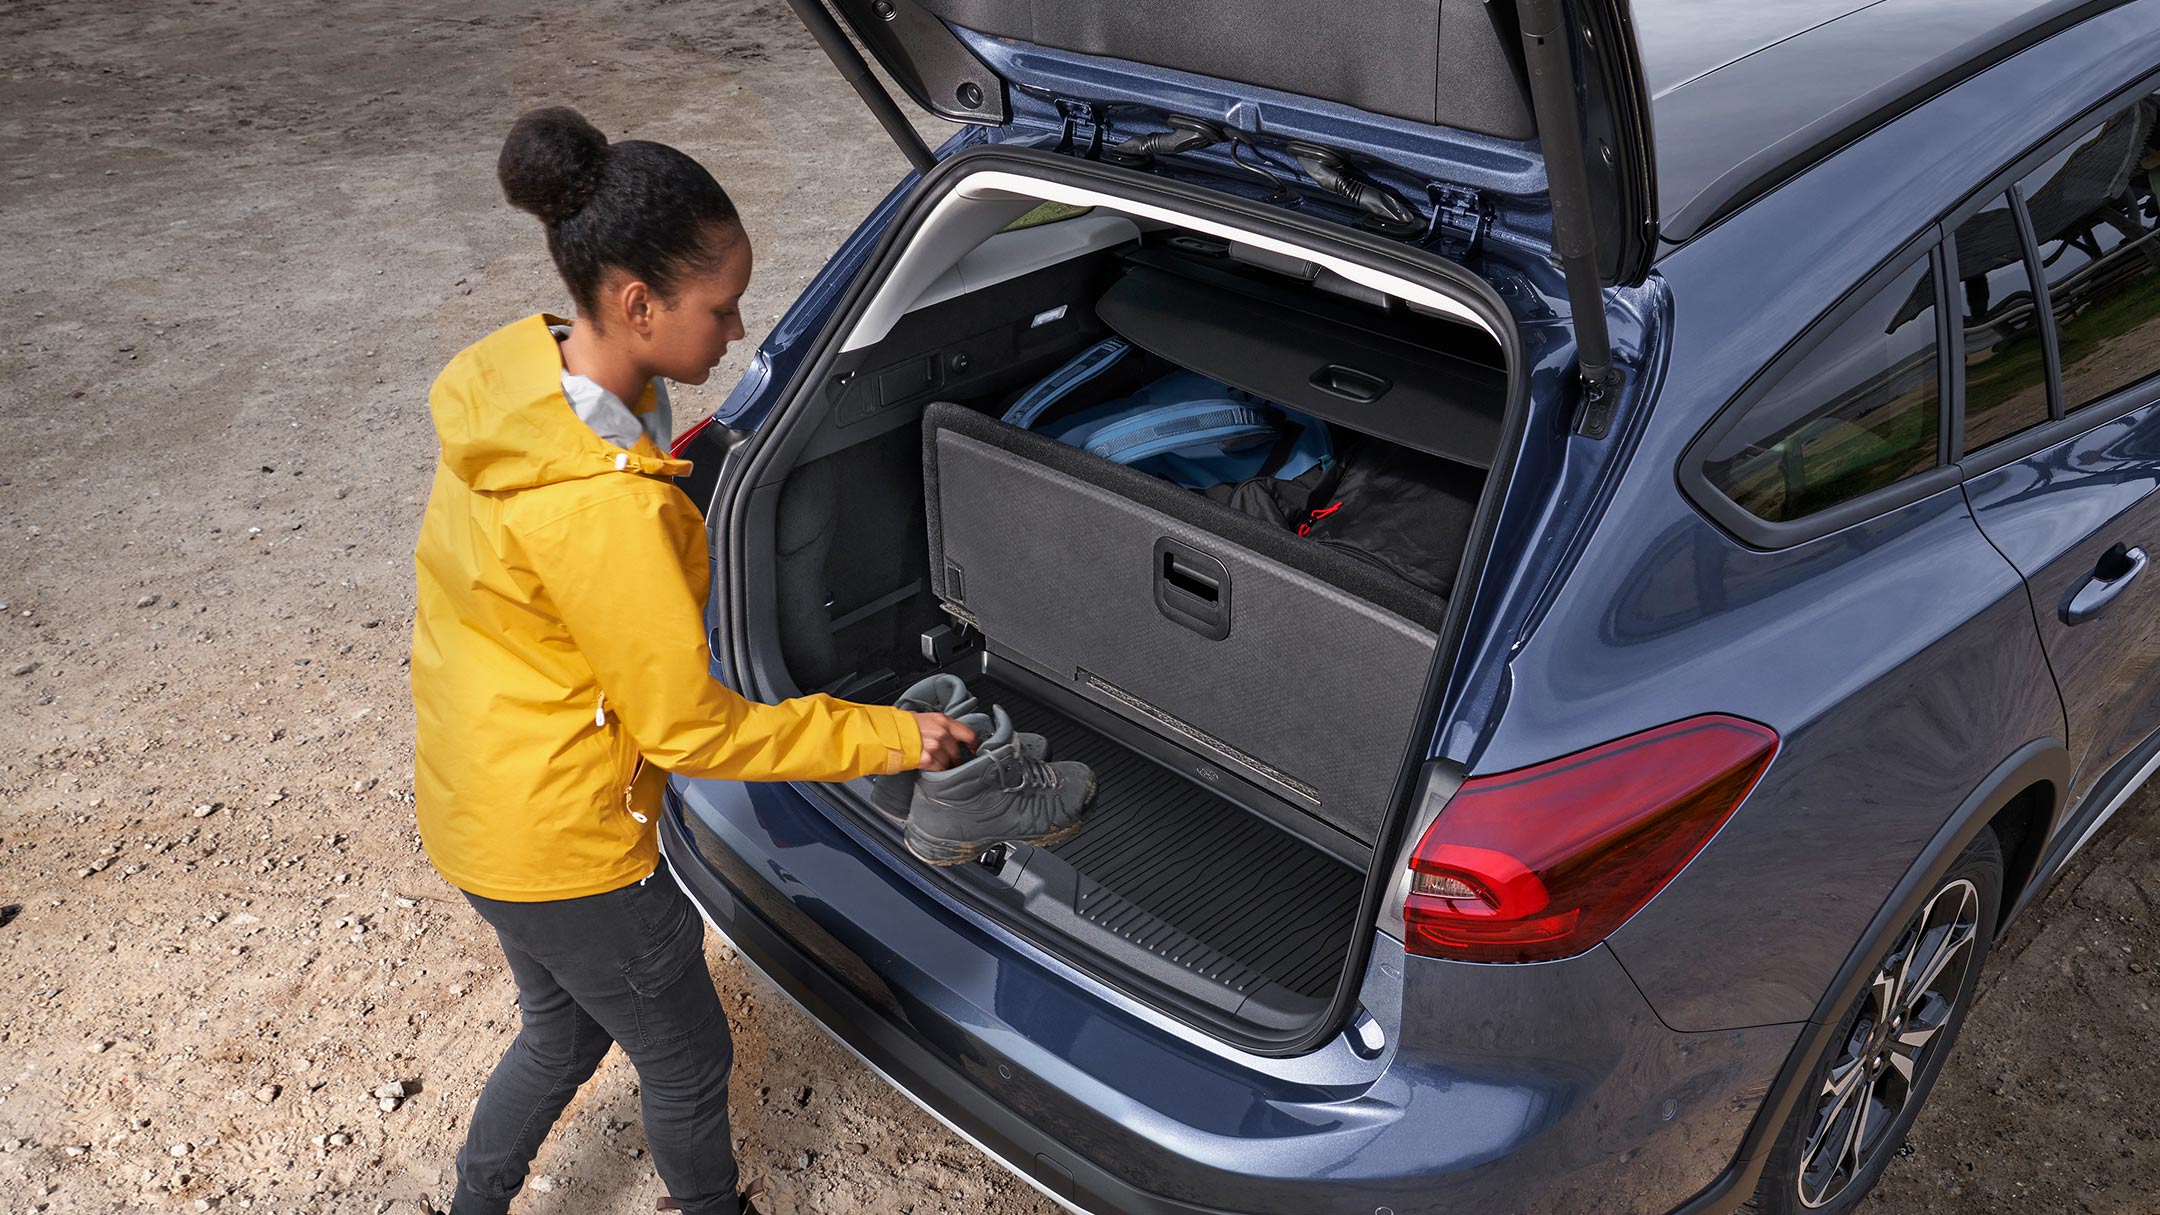 New Ford Focus trunk showing wet compartment